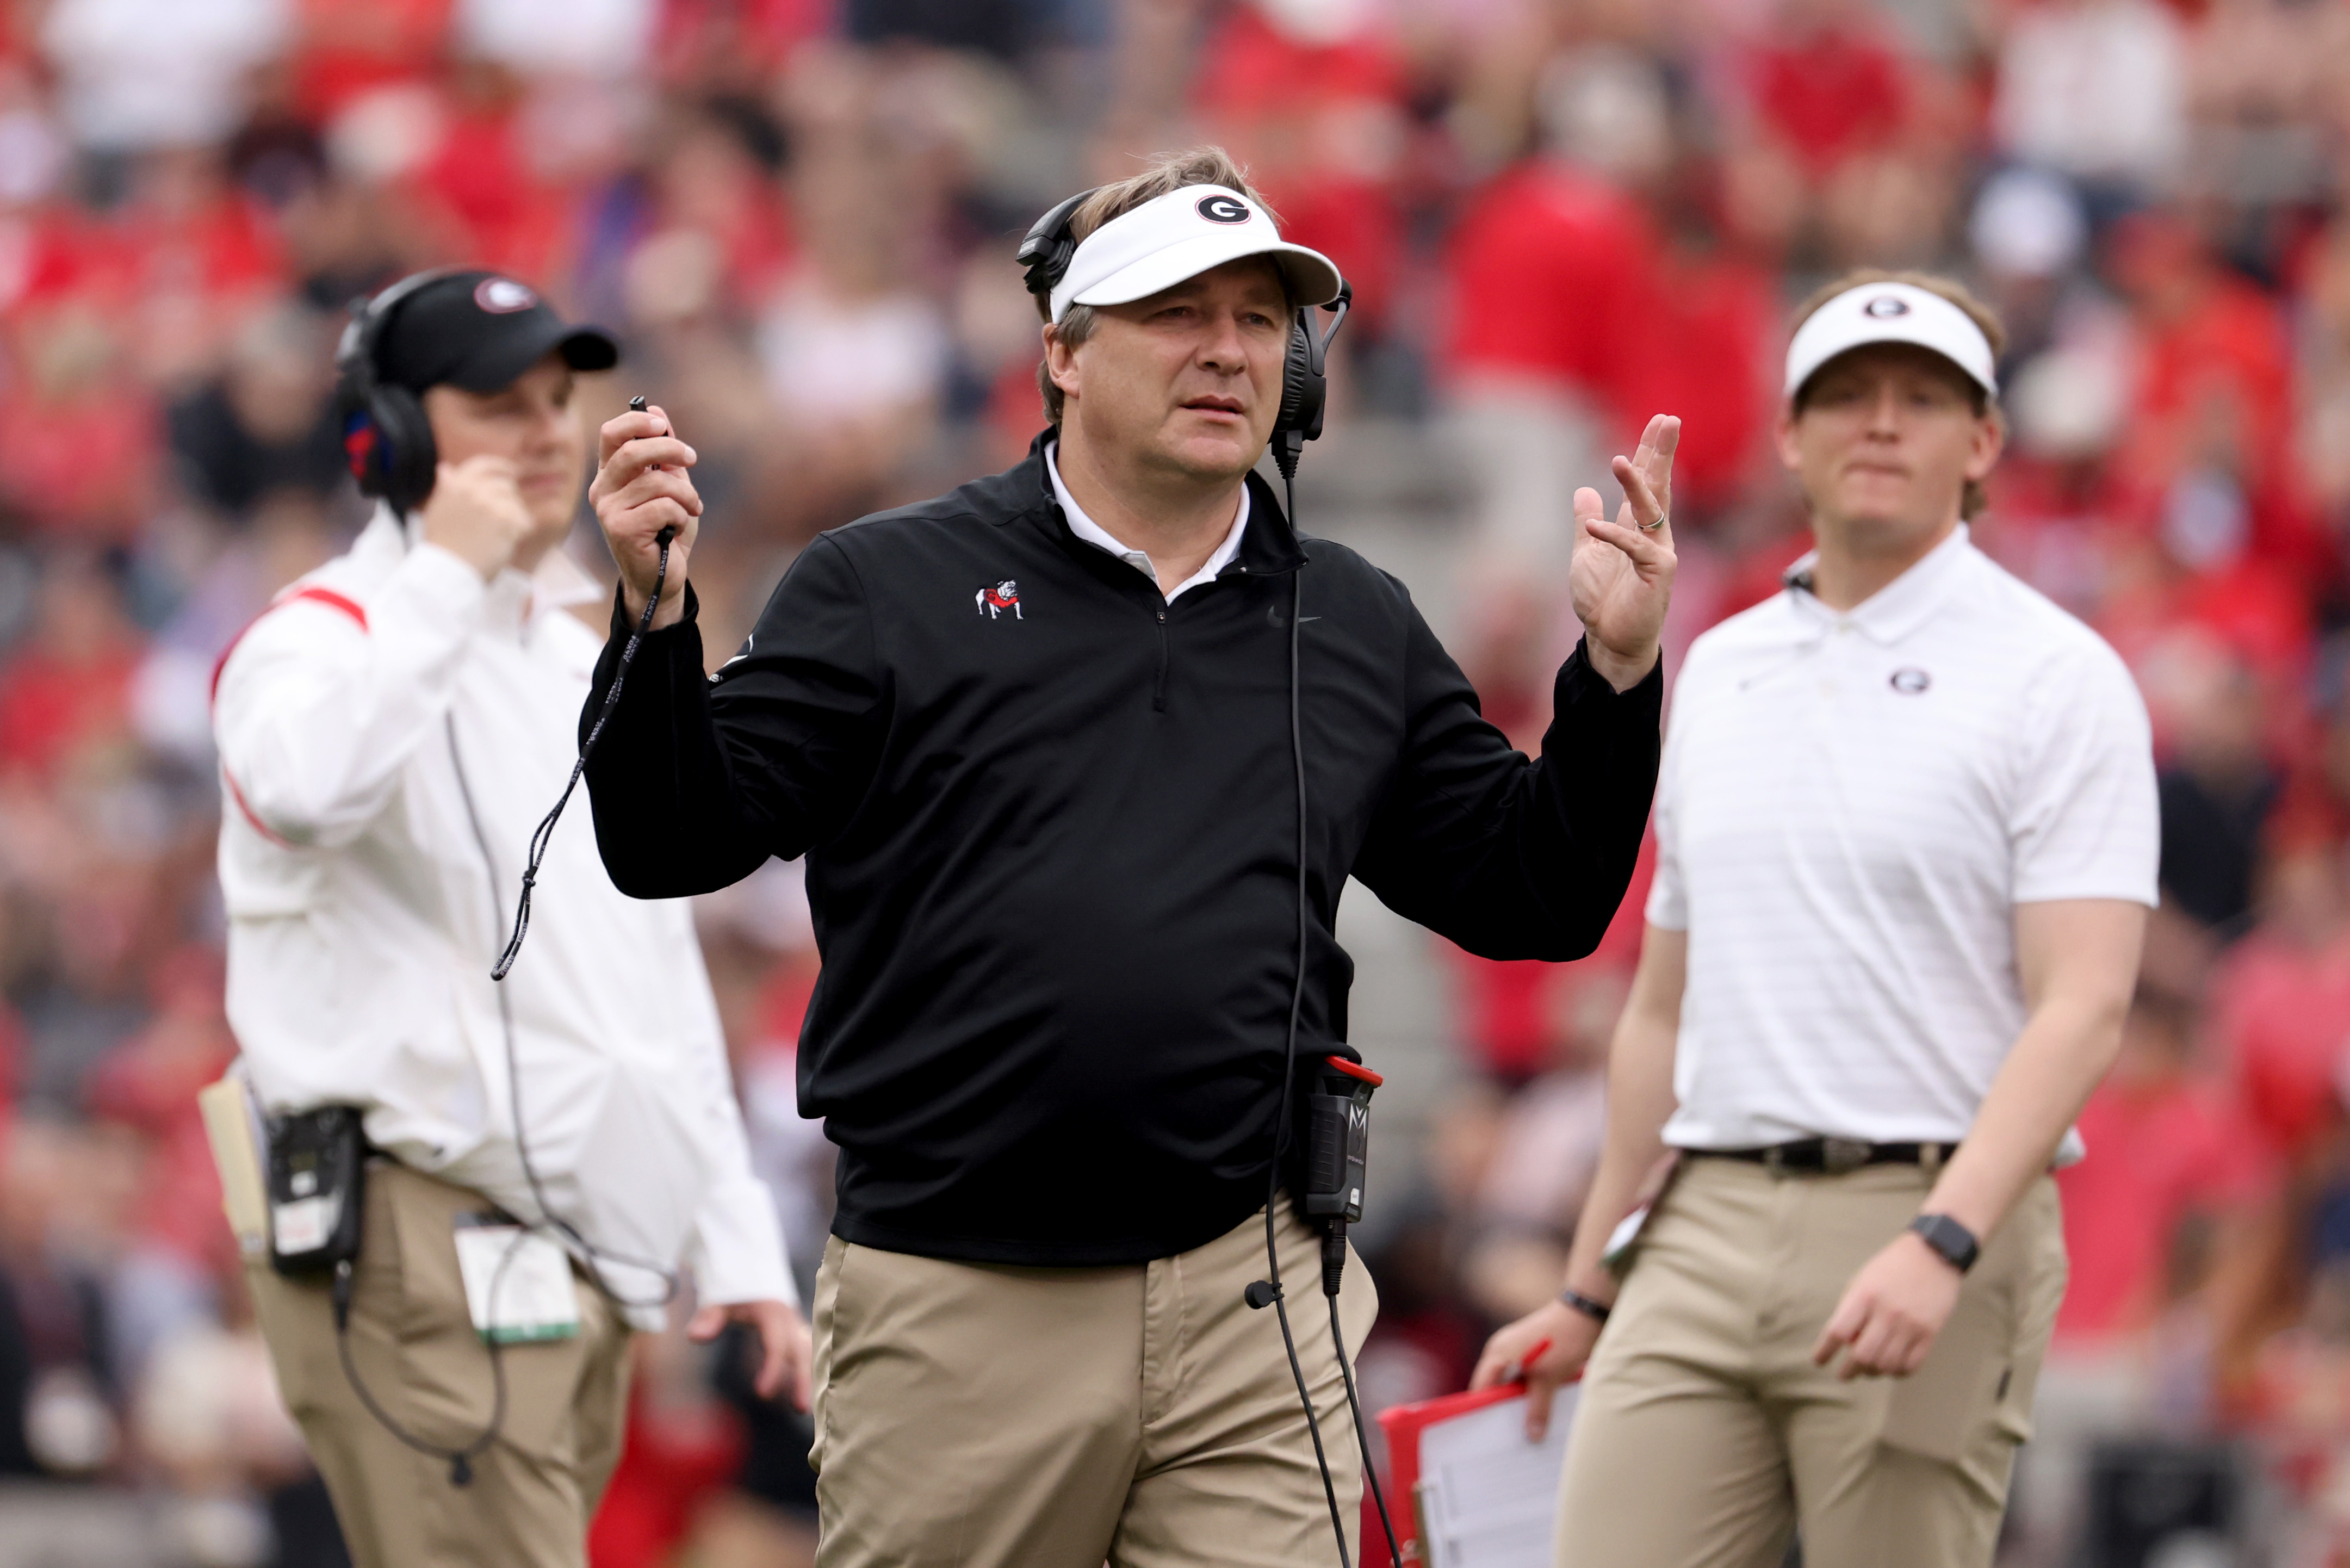 Lamborghini NIL Deals? Kirby Smart, Deion Sanders agree extremes challenge college football picture